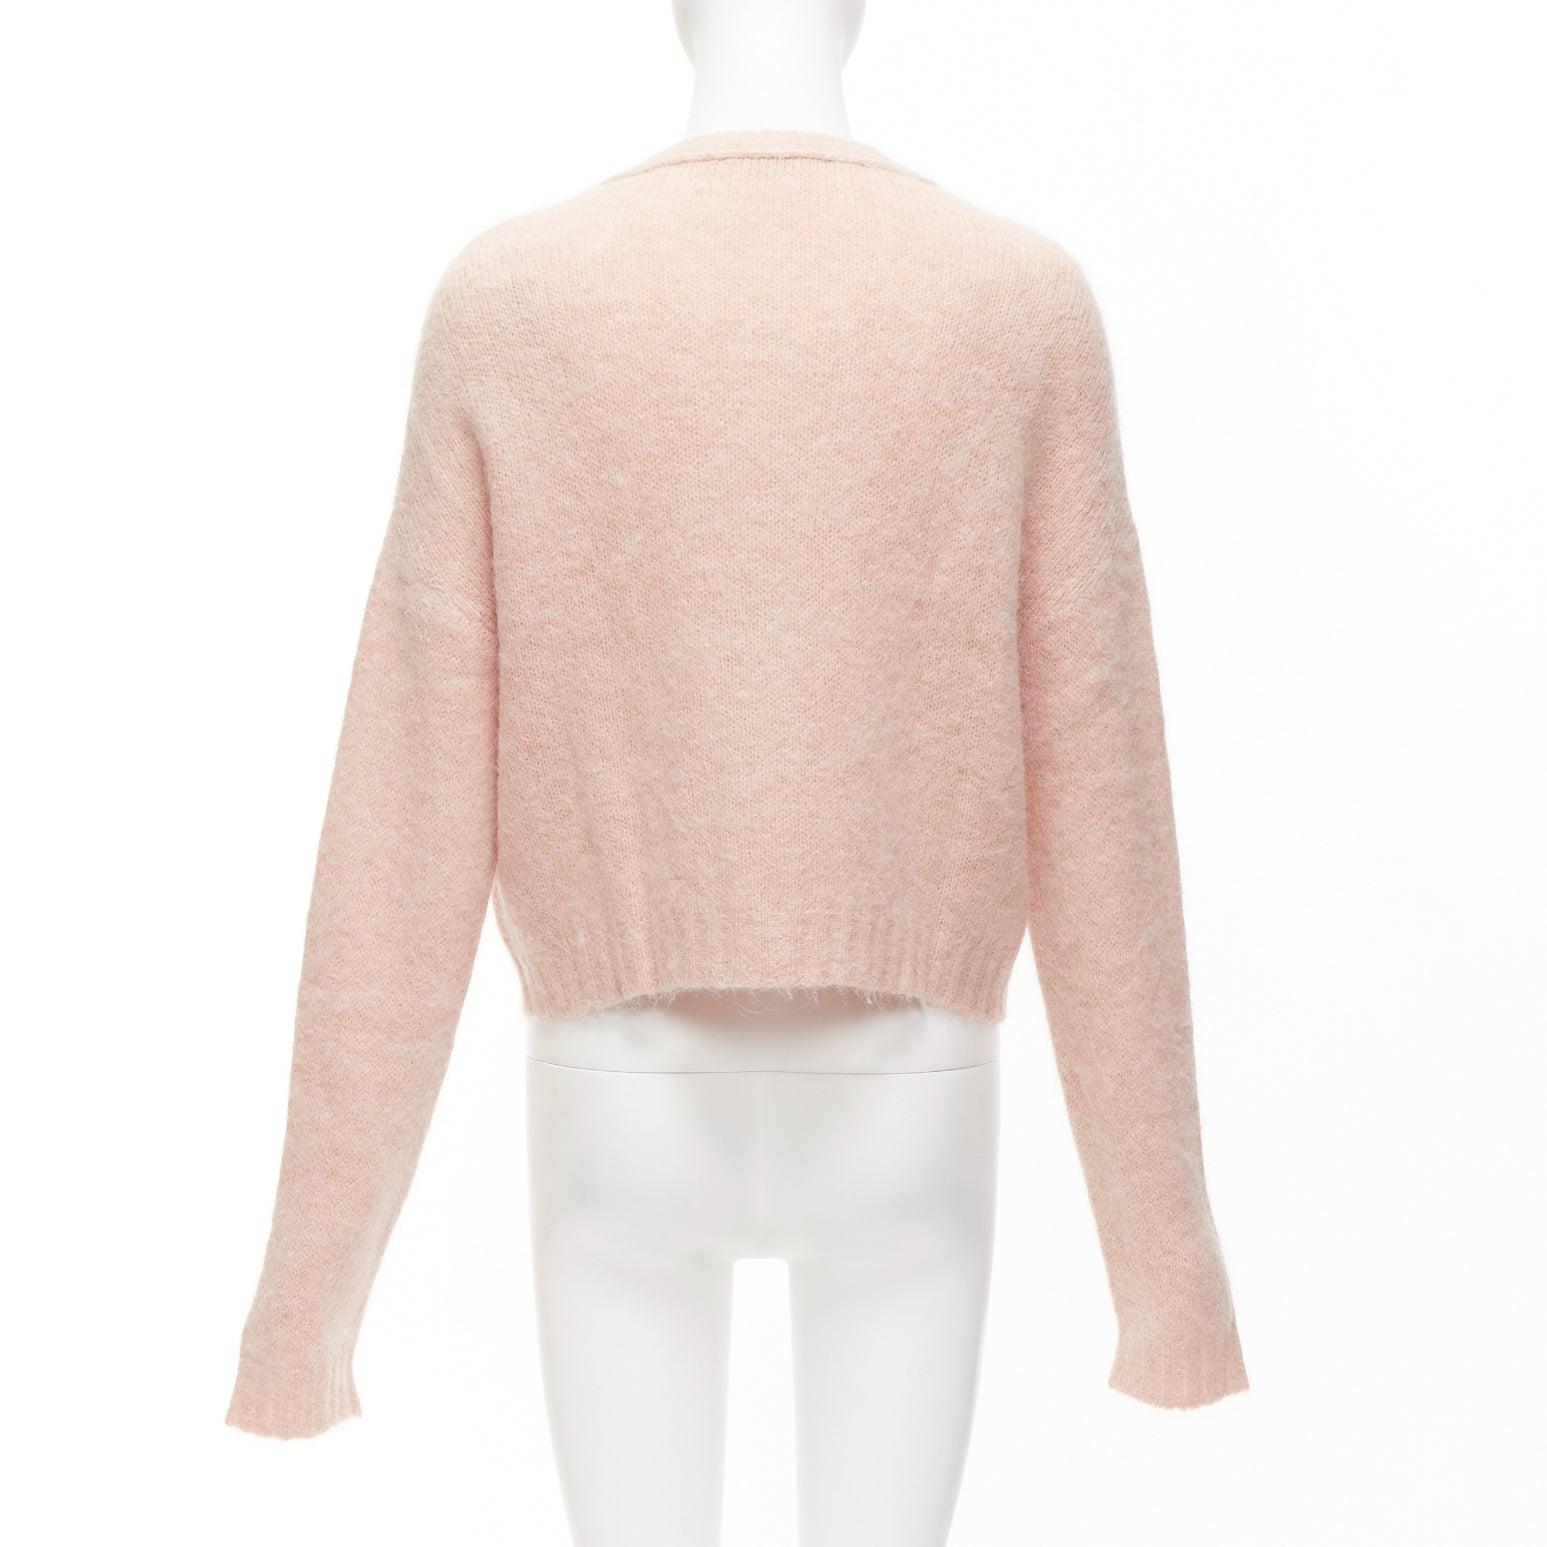 RED VALENTINO pink alpaca blend horn button cardigan sweater XS For Sale 3